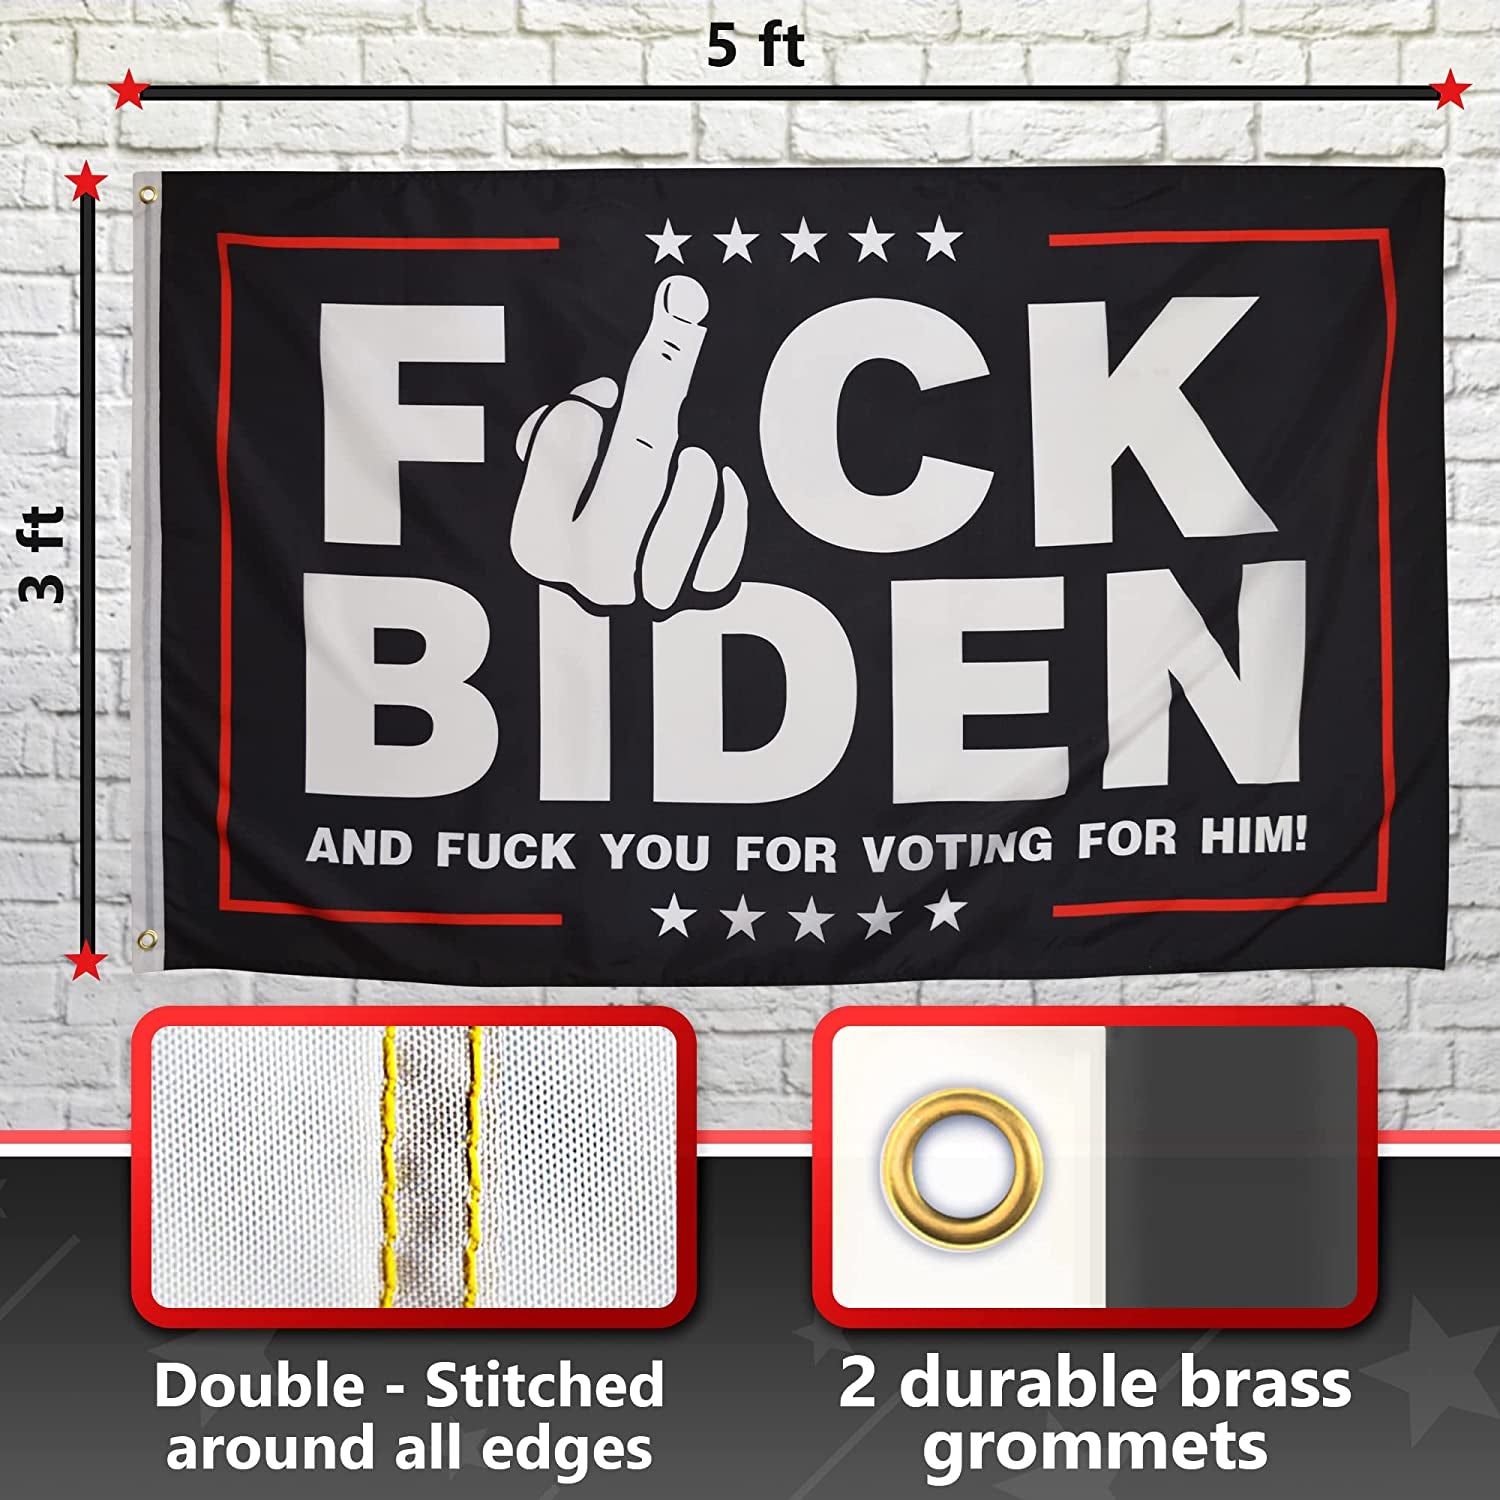 Eugenys, Eugenys Biden Flag 3X5 Foot - for Voting for Him Flag -Bright Vivid Colors, Double Stitched, Durable Brass Grommets - Perfect anti Biden Flag Banner for Indoor / Outdoor